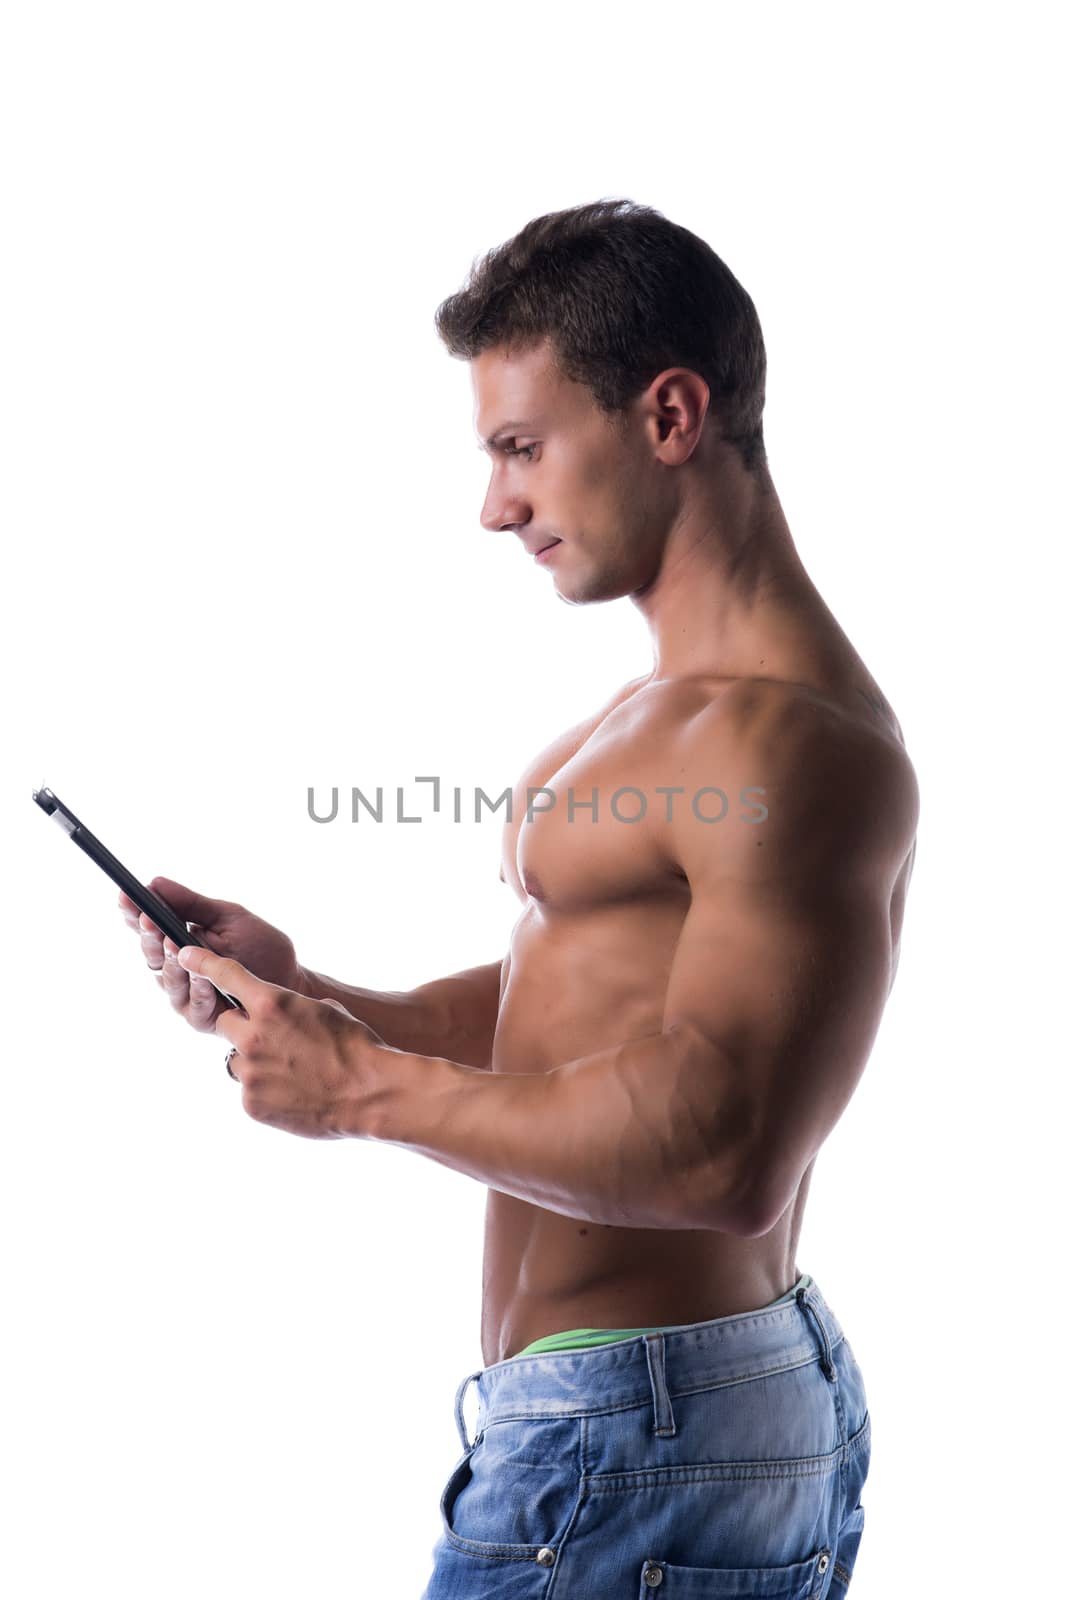 Shirtless young male bodybuiler holding ebook reader or tablet PC standing isolated on white background